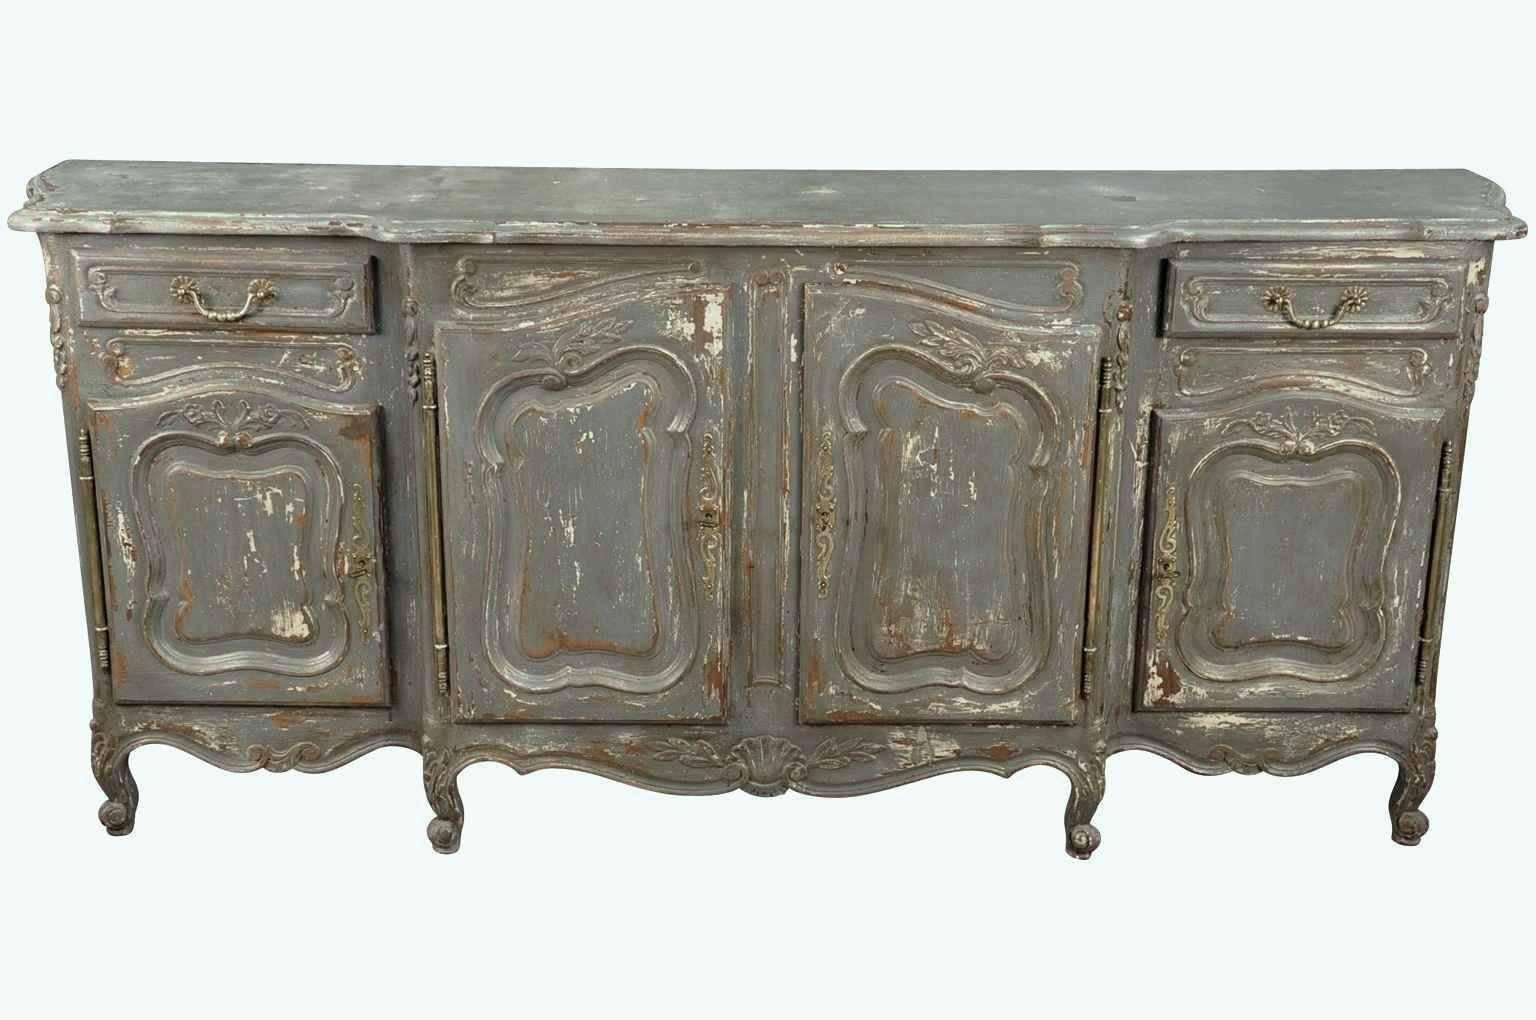 A charming French buffet, enfilade from the Provenance region of France. Soundly constructed from painted wood with a wonderful finish and patina.